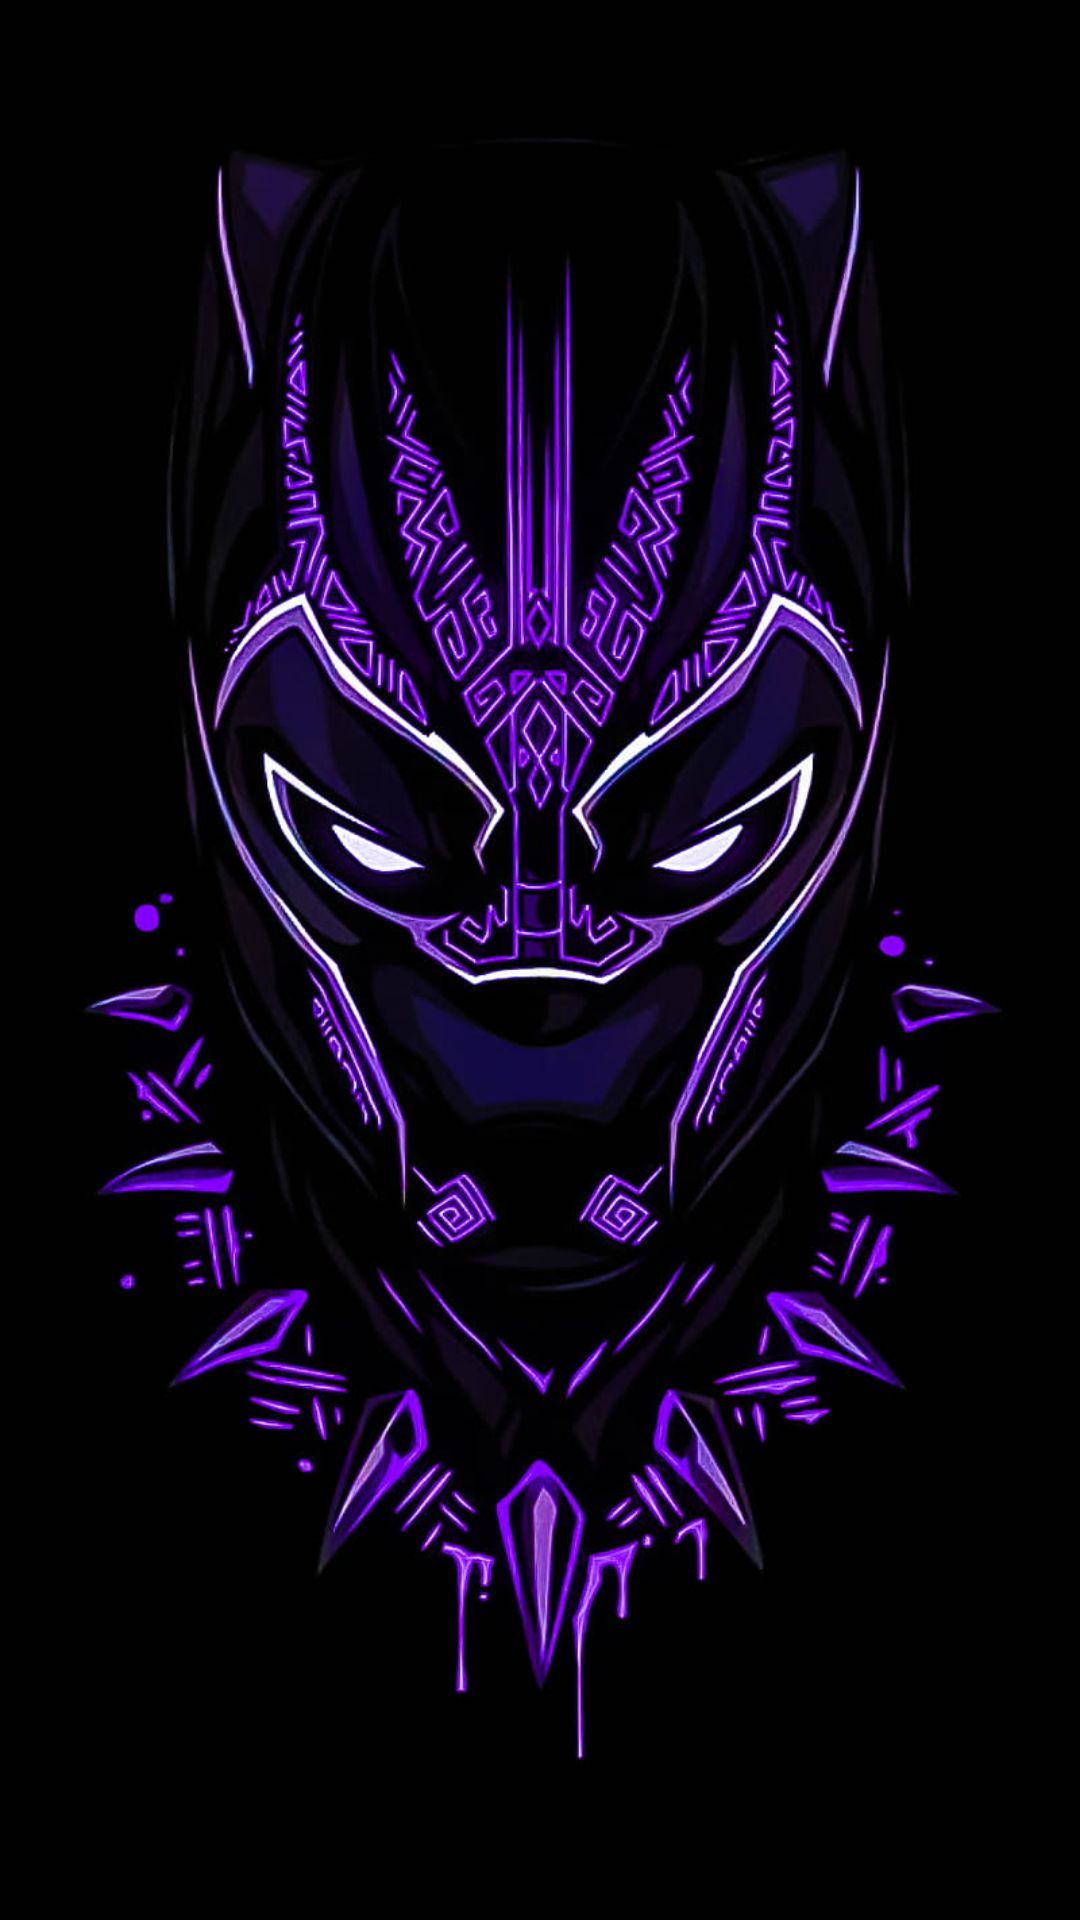 Black Panther iPhone Wallpaper with high-resolution 1080x1920 pixel. You can use this wallpaper for your iPhone 5, 6, 7, 8, X, XS, XR backgrounds, Mobile Screensaver, or iPad Lock Screen - Marvel